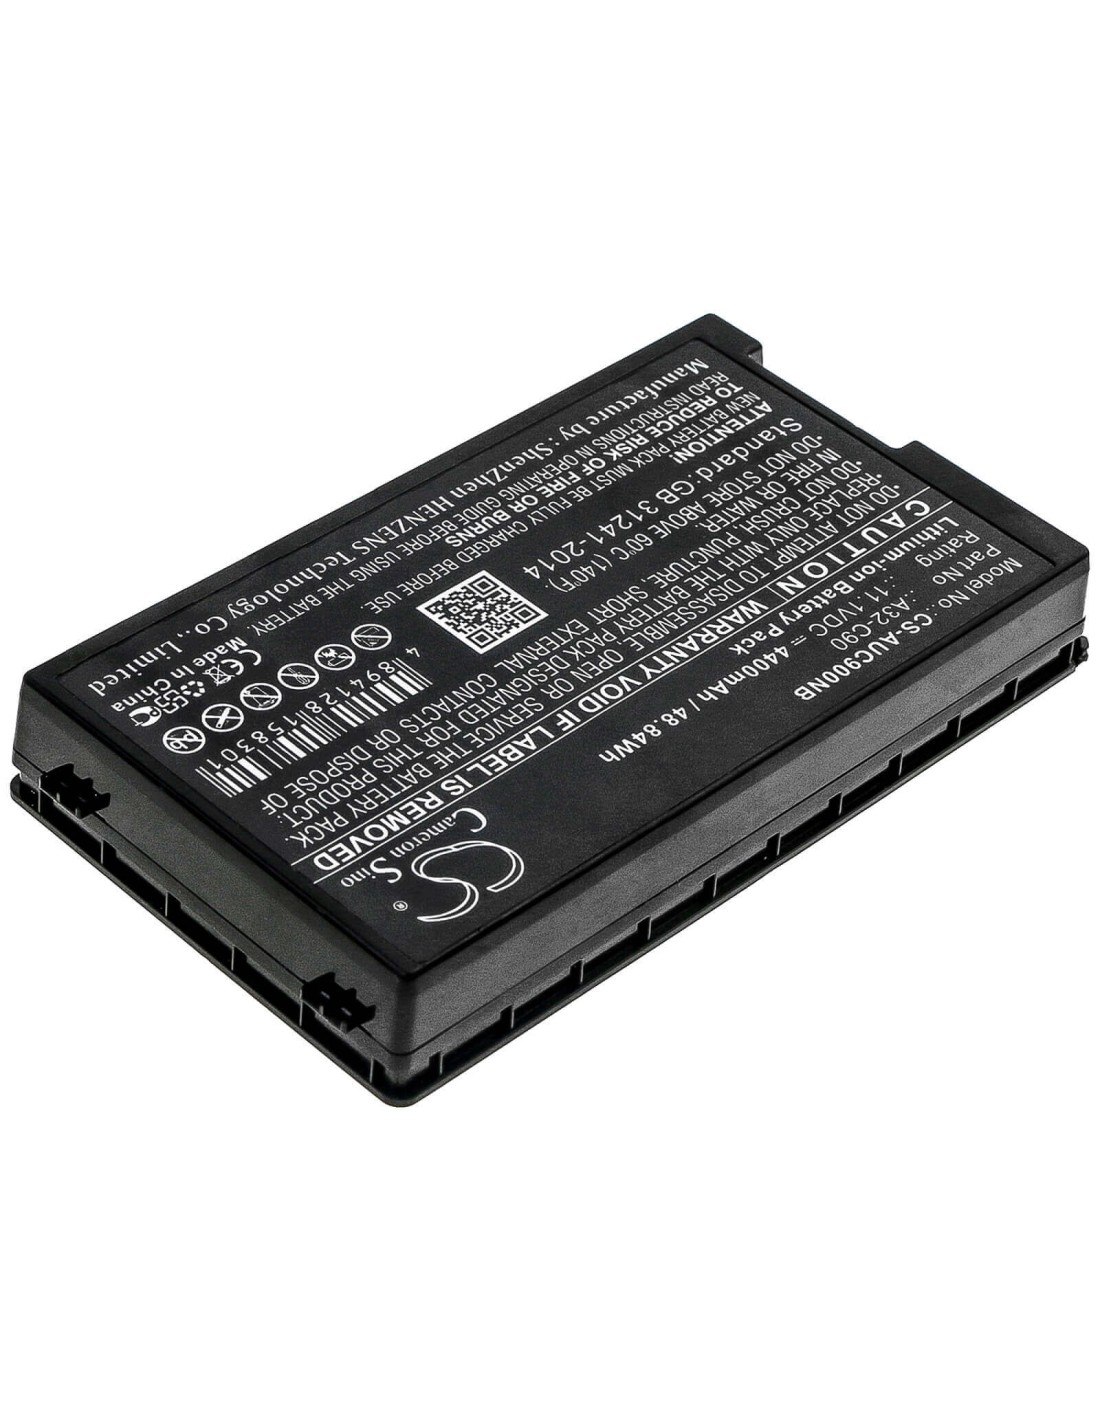 Battery for Asus, C90, C90a, C90p 11.1V, 4400mAh - 48.84Wh